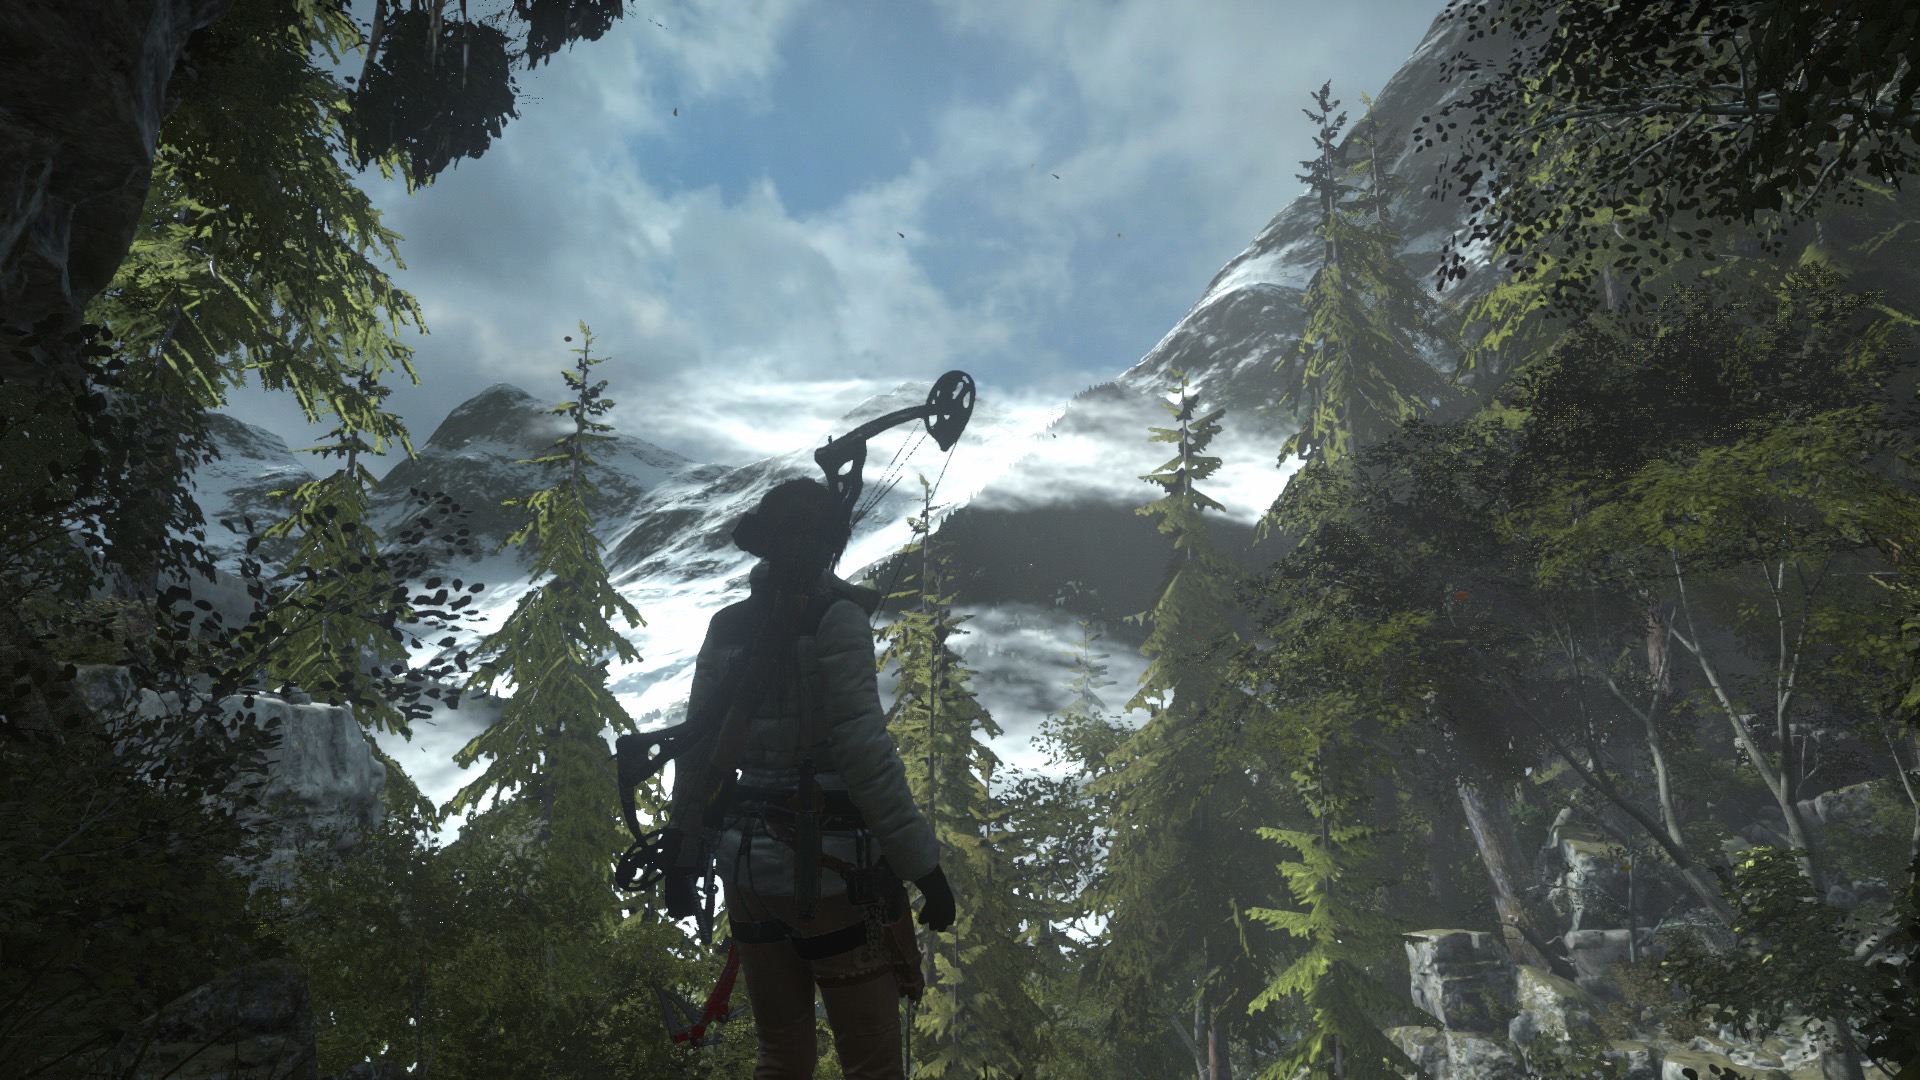 Lara looks out at snow capped mountains